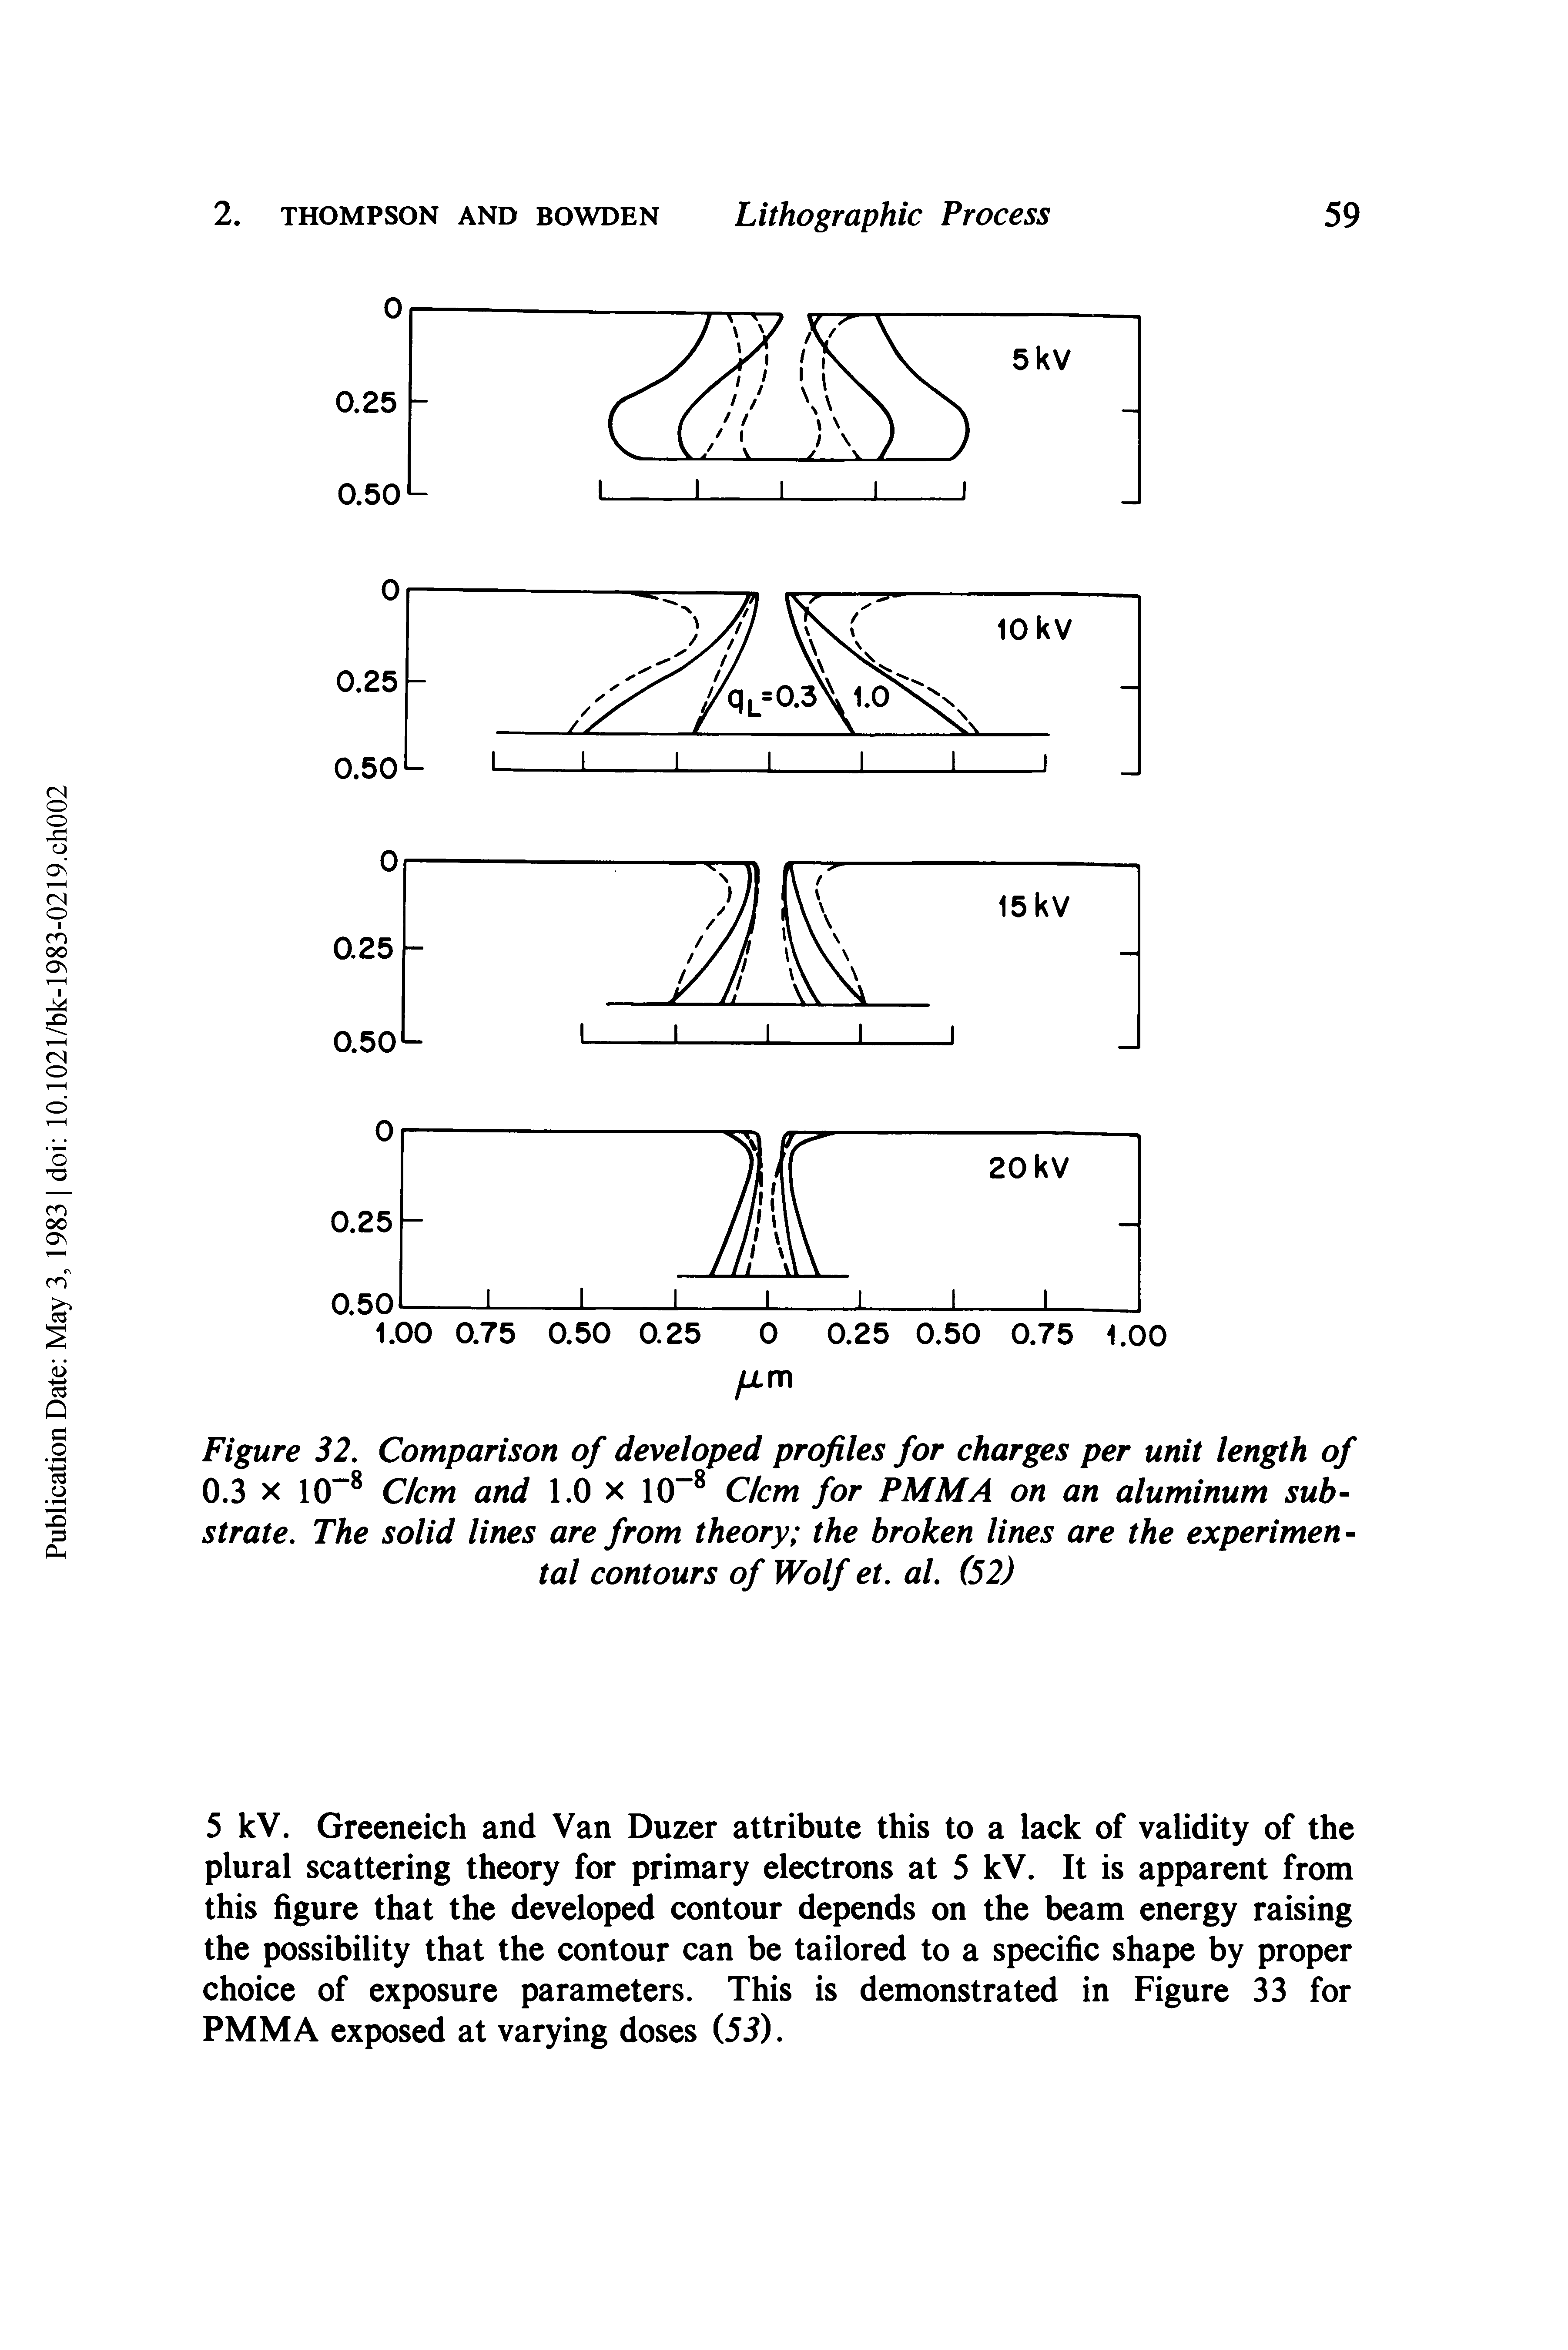 Figure 32. Comparison of developed profiles for charges per unit length of 0.3 X 10 Clem and 1.0 x 10 Ckm for PMMA on an aluminum substrate. The solid lines are from theory the broken lines are the experimental contours of Wolf et. al. (52)...